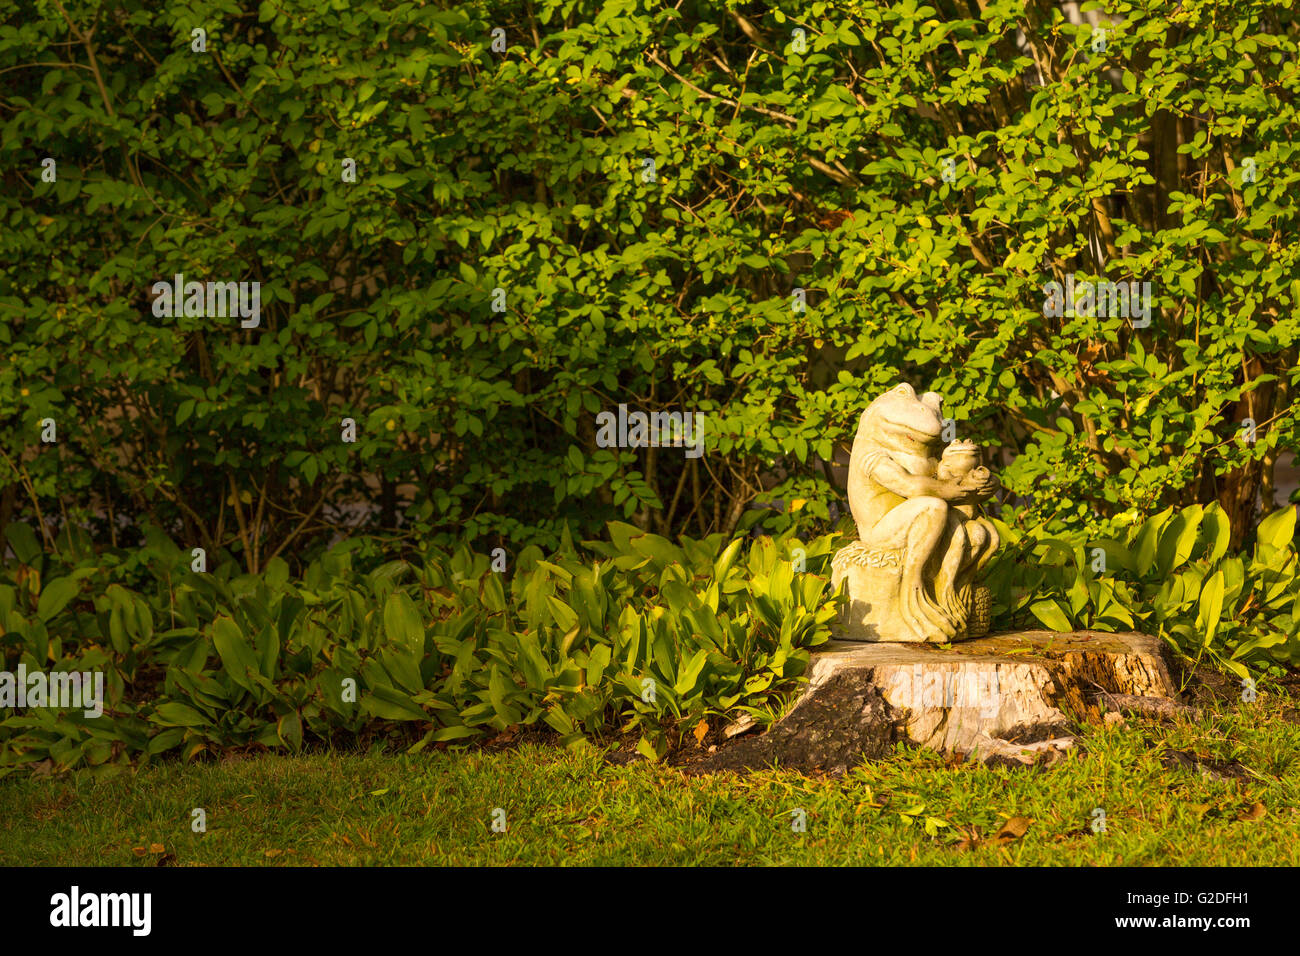 concrete sculpture of a larger frog holding a small frog in a garden setting Stock Photo